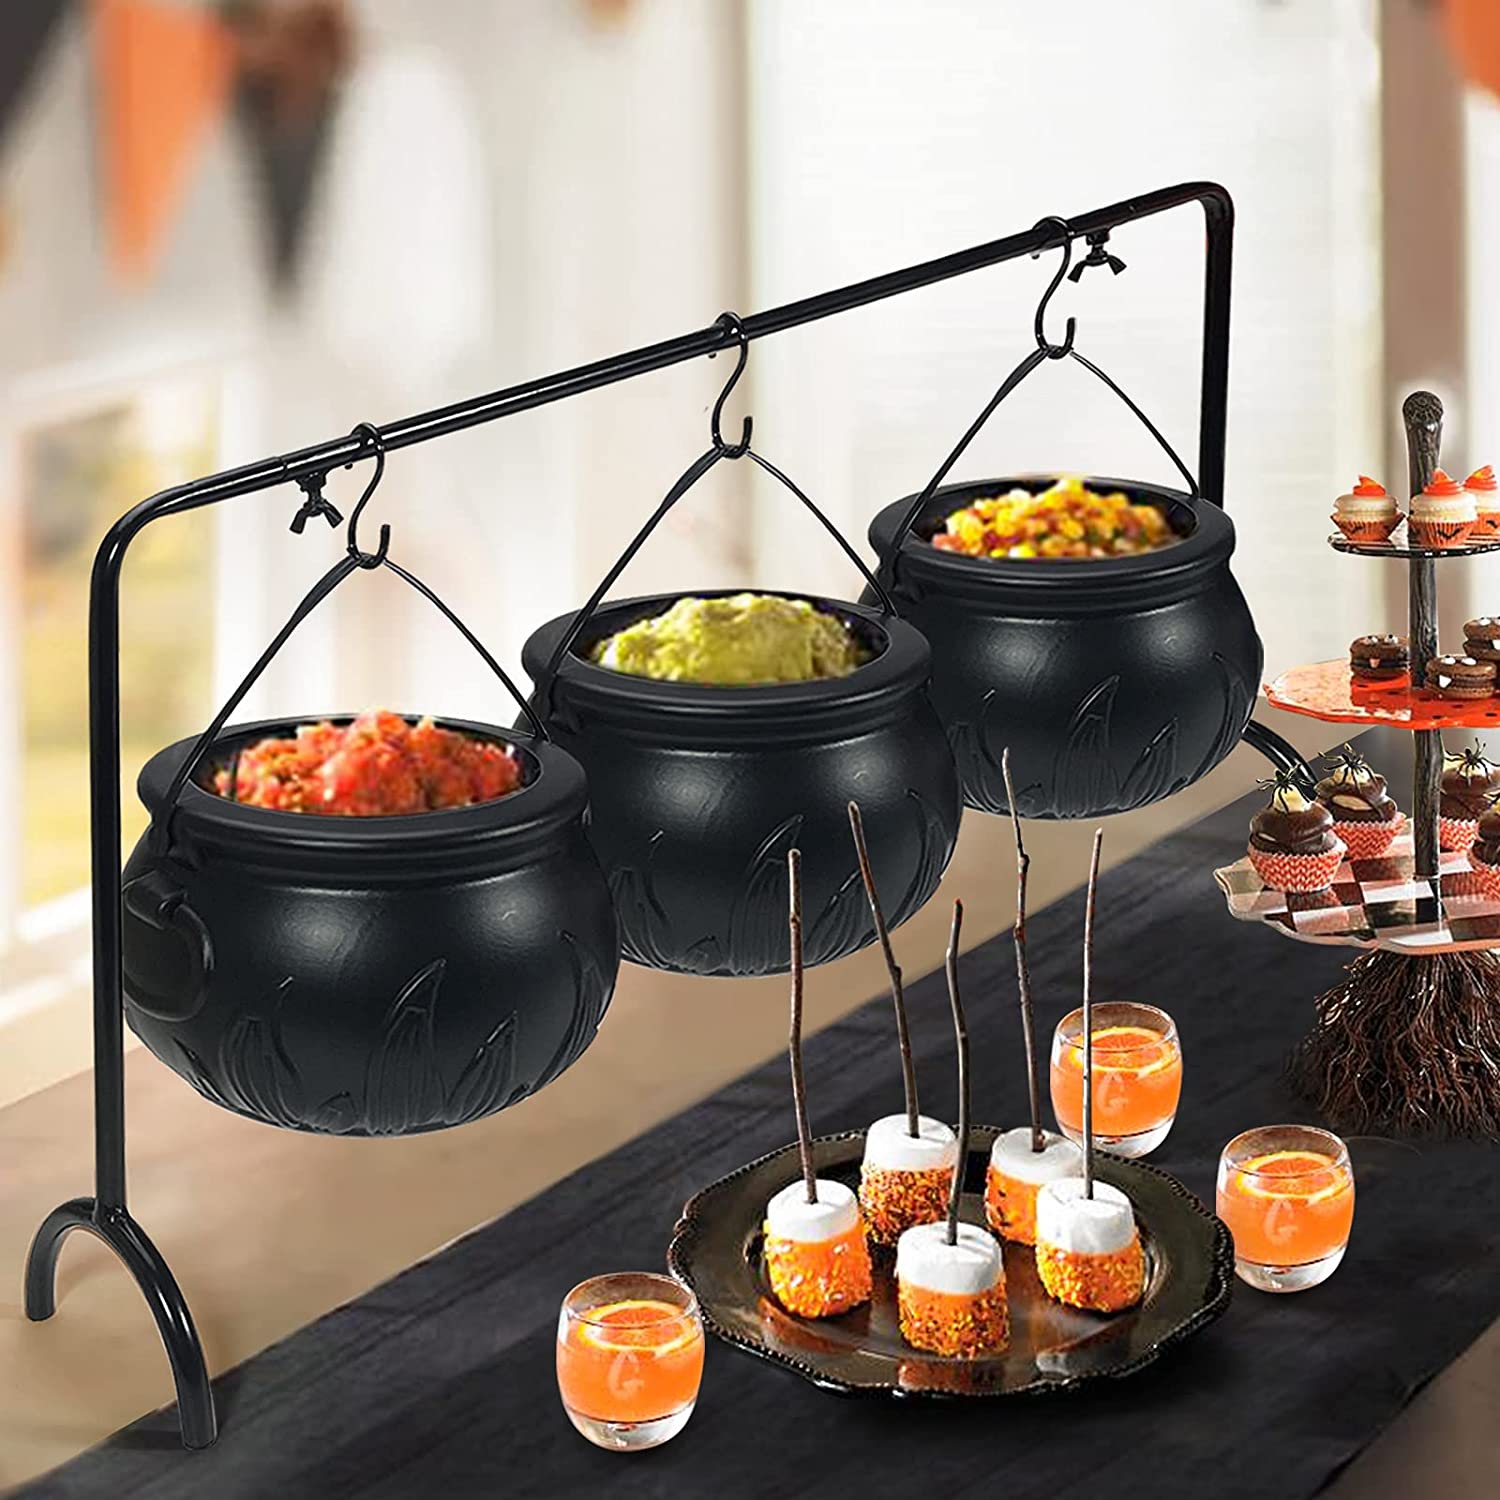 trio of Witches cauldrons have shiny black finish, metal handle equipped.